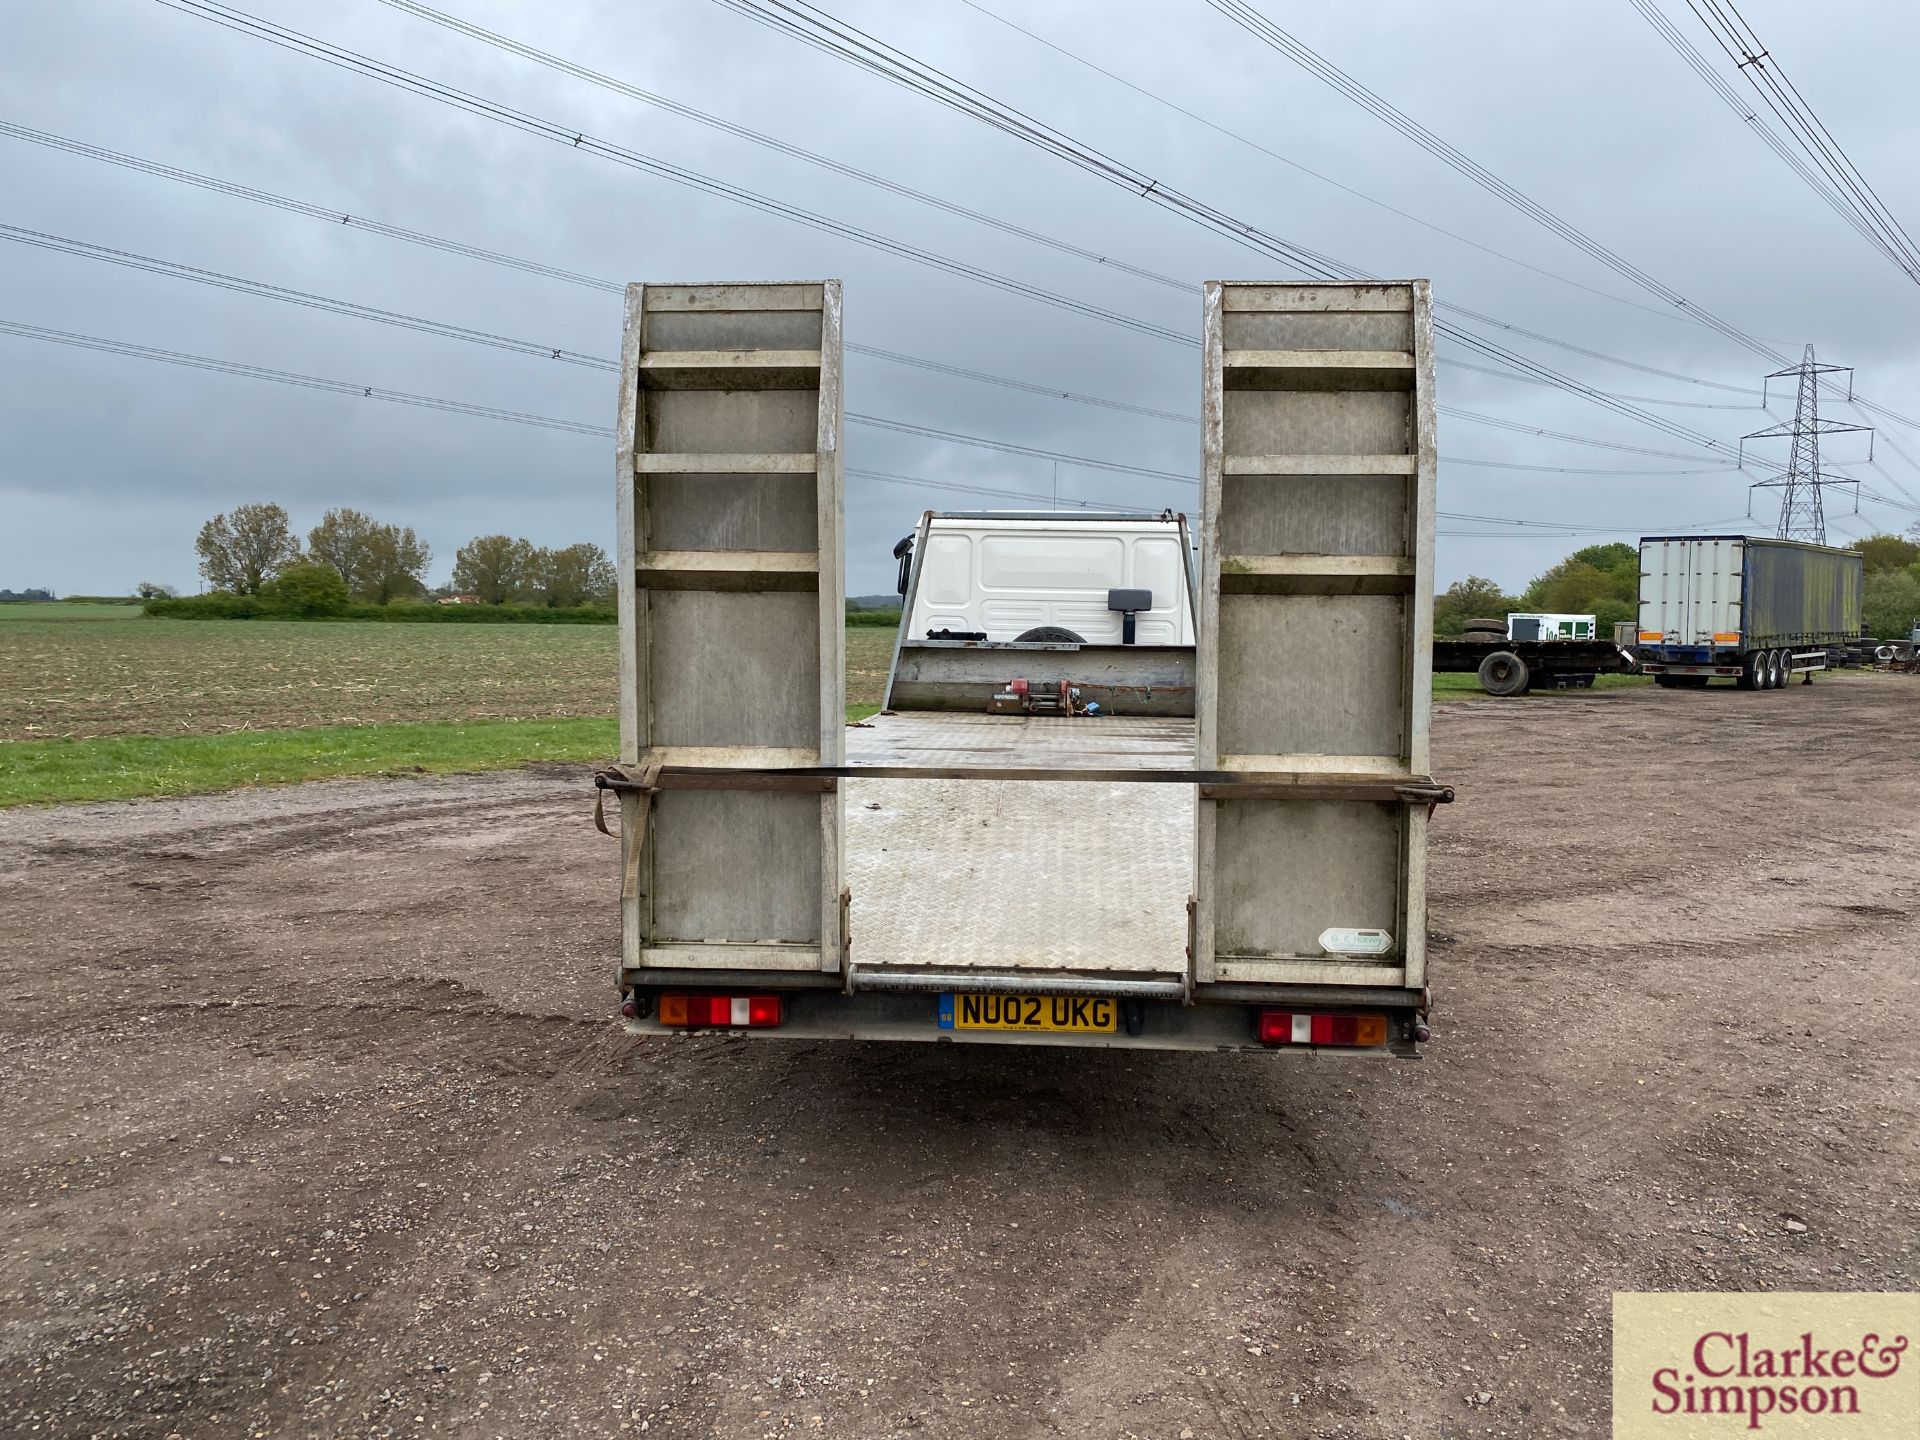 MAN LE150C 7.5T 4x2 beavertail lorry. Registration NU02 UKG. Date of first registration 15/05/ - Image 4 of 46